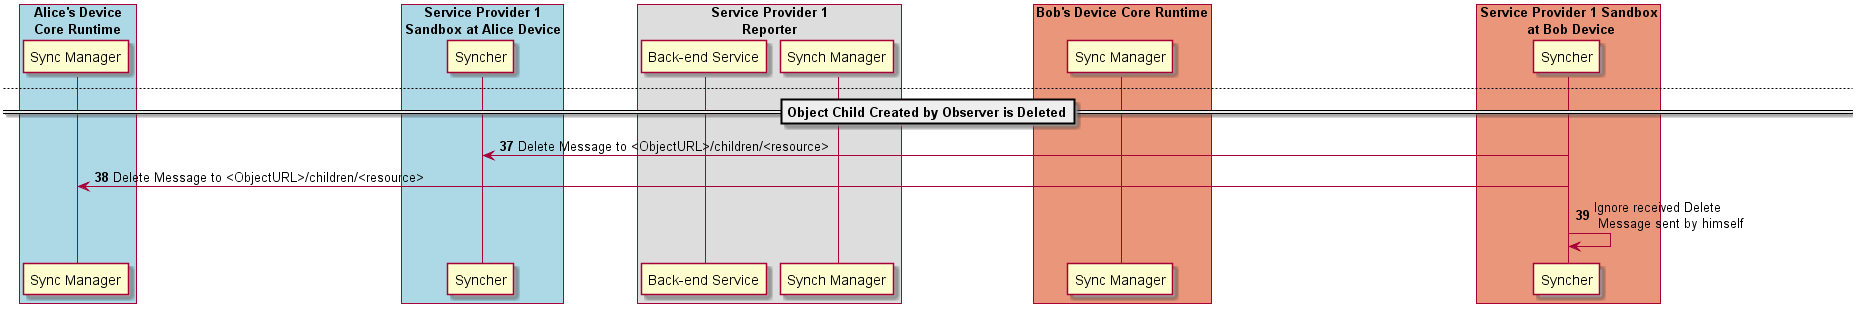 Figure @data-object-child-delete-createdby-observer Delete of Data Object Child that was created by Data Object Parent Observer